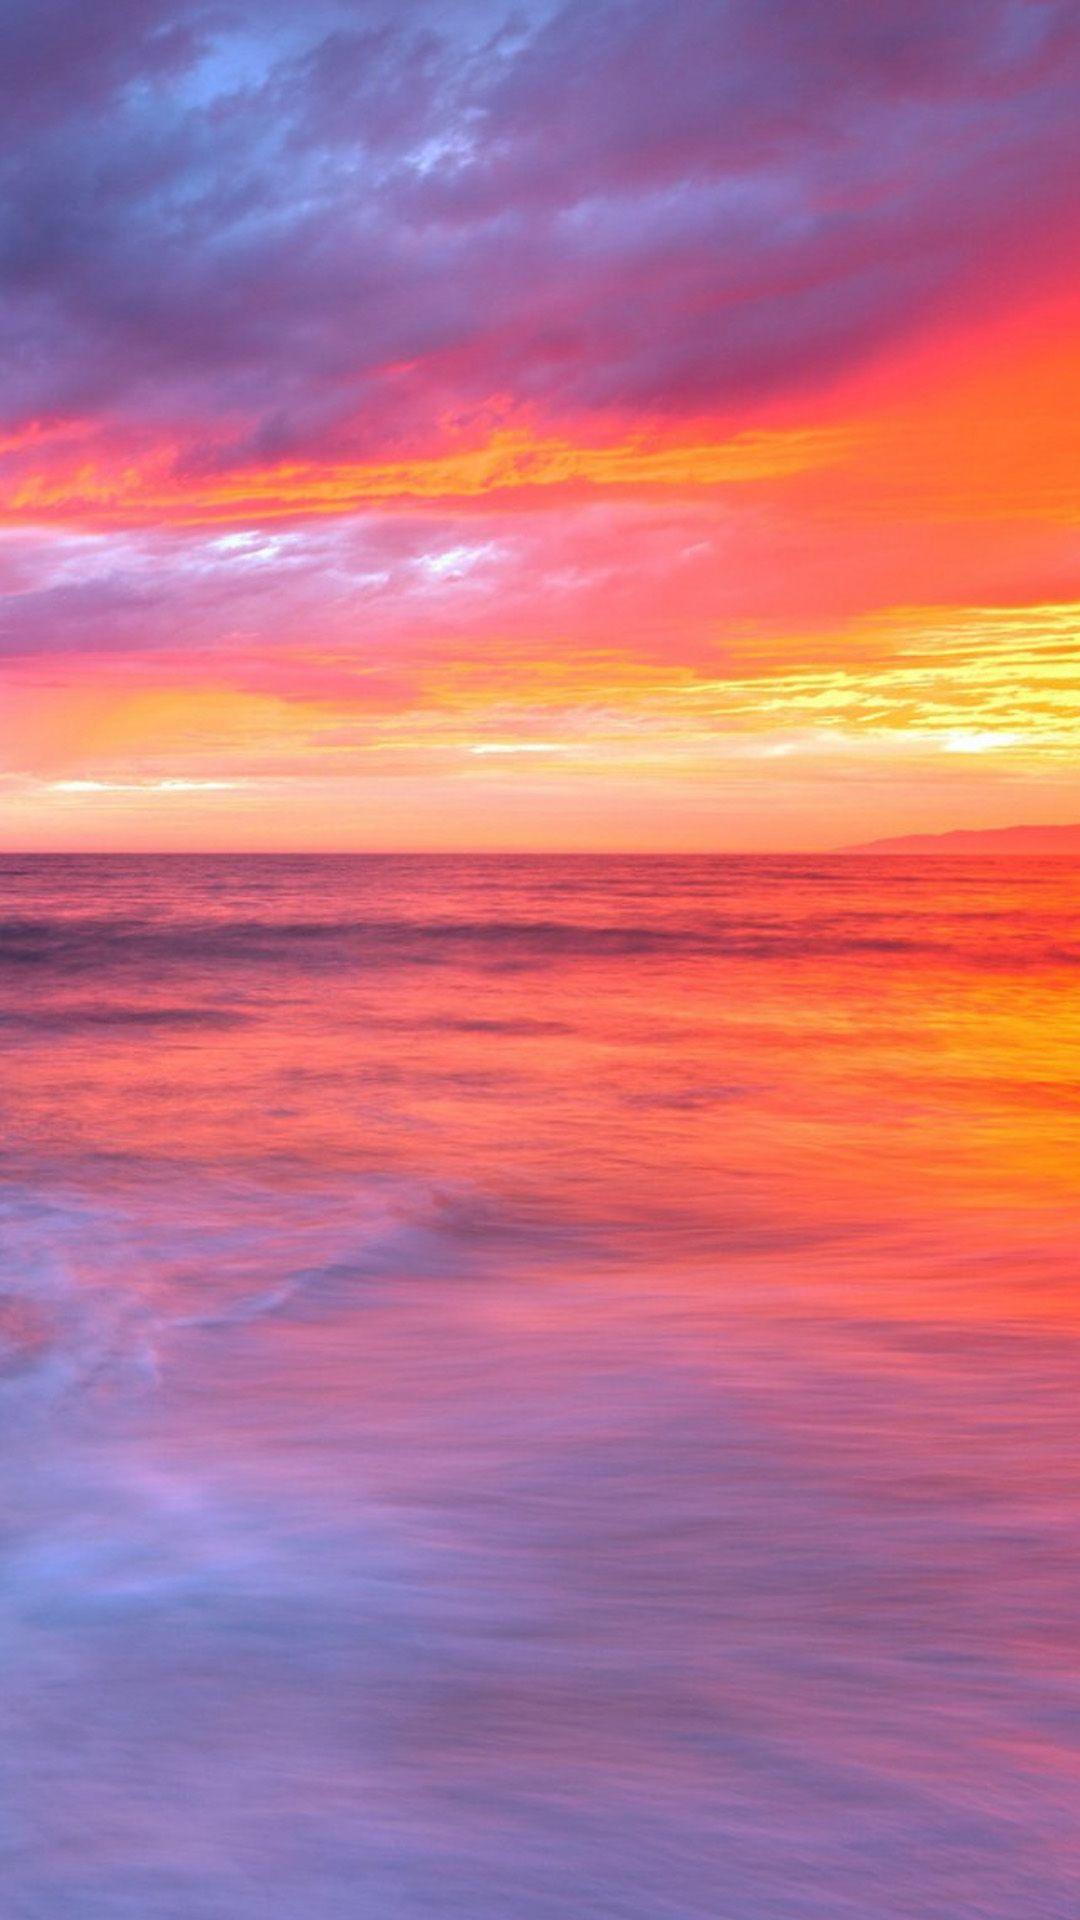 Inspirational Beach Sunset Wallpaper for iPhone 5. The Most